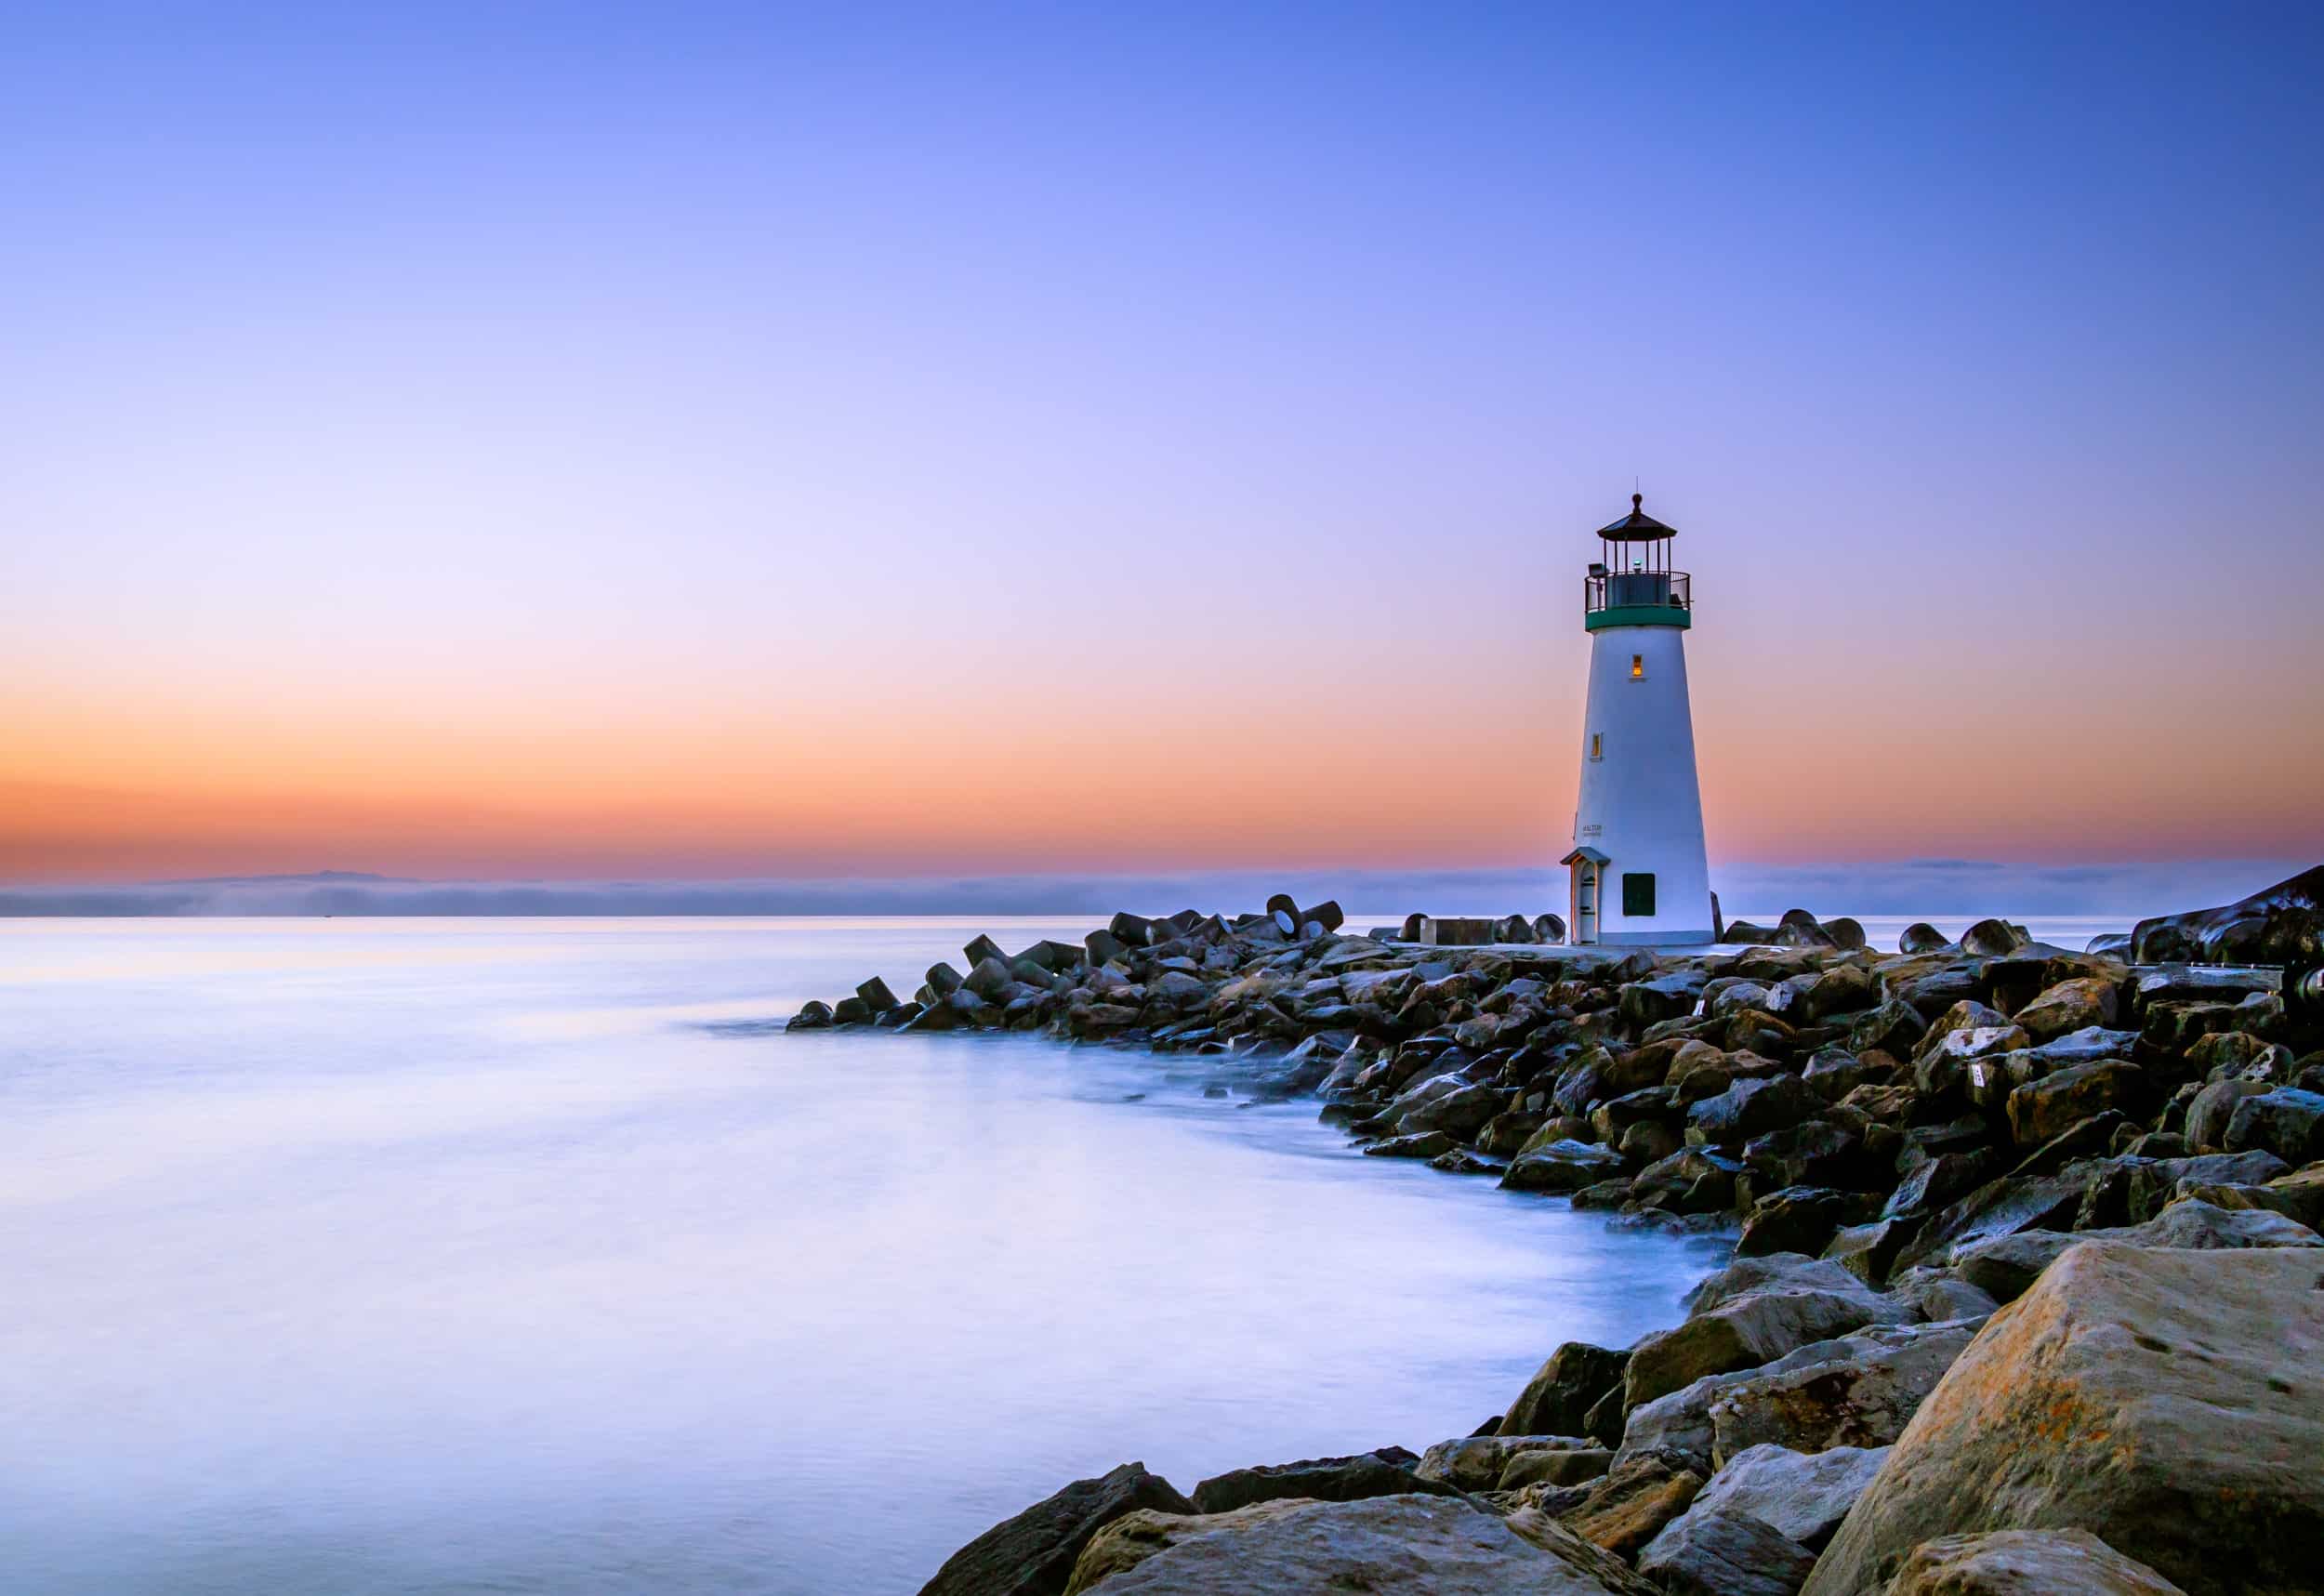 Lighthouse off the coast of the United States of America